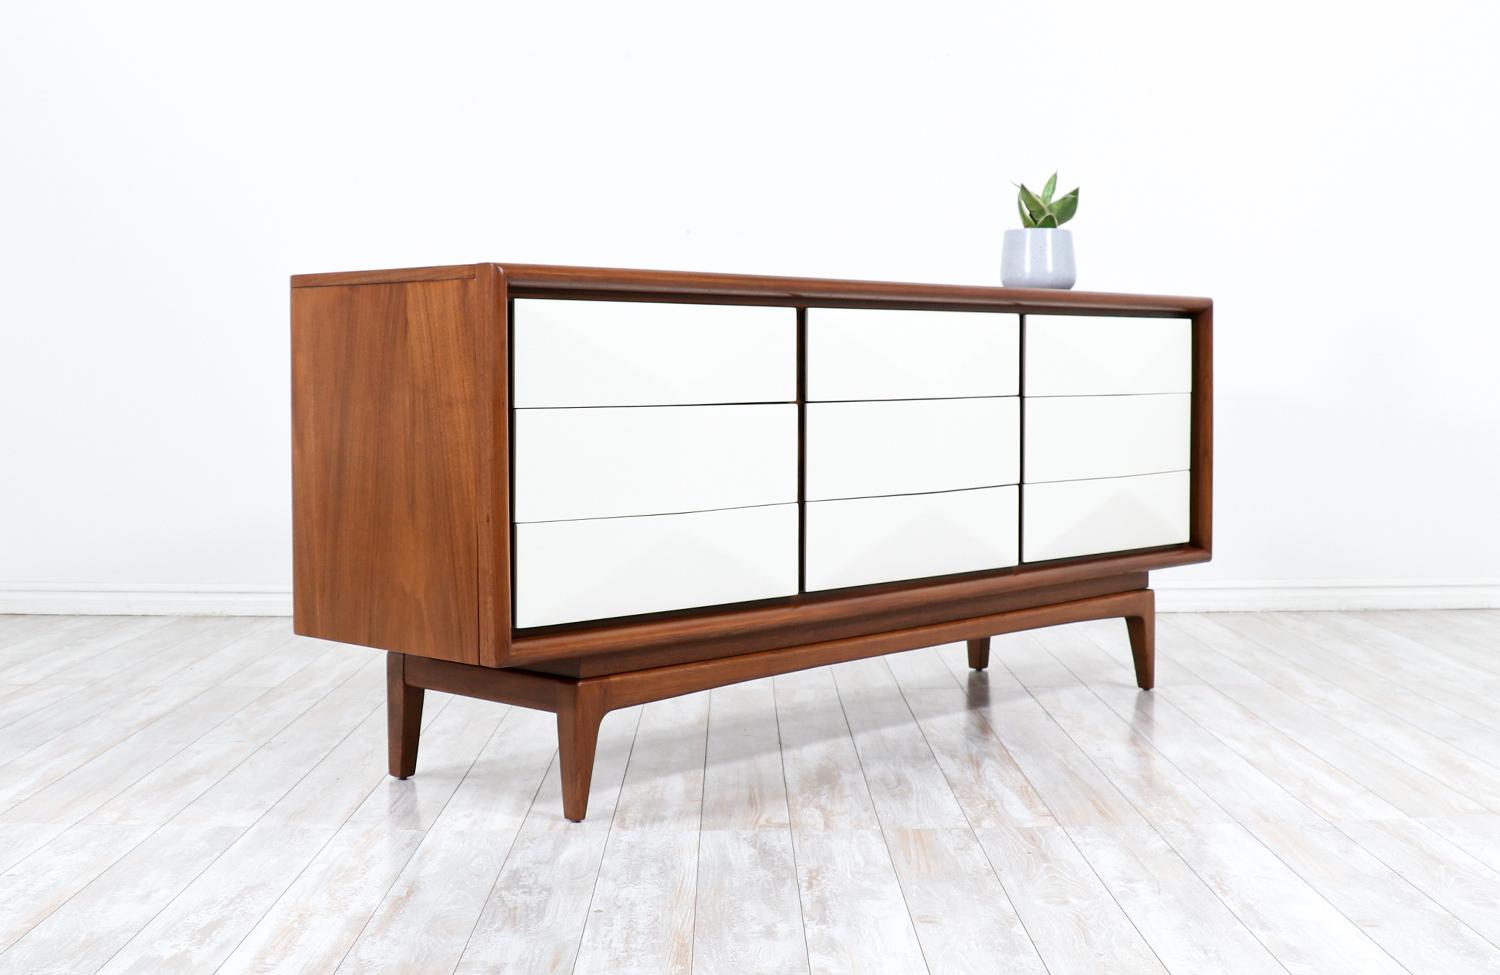 American Mid-Century Modern Two-Toned Lacquered & Walnut Dresser by United Furniture